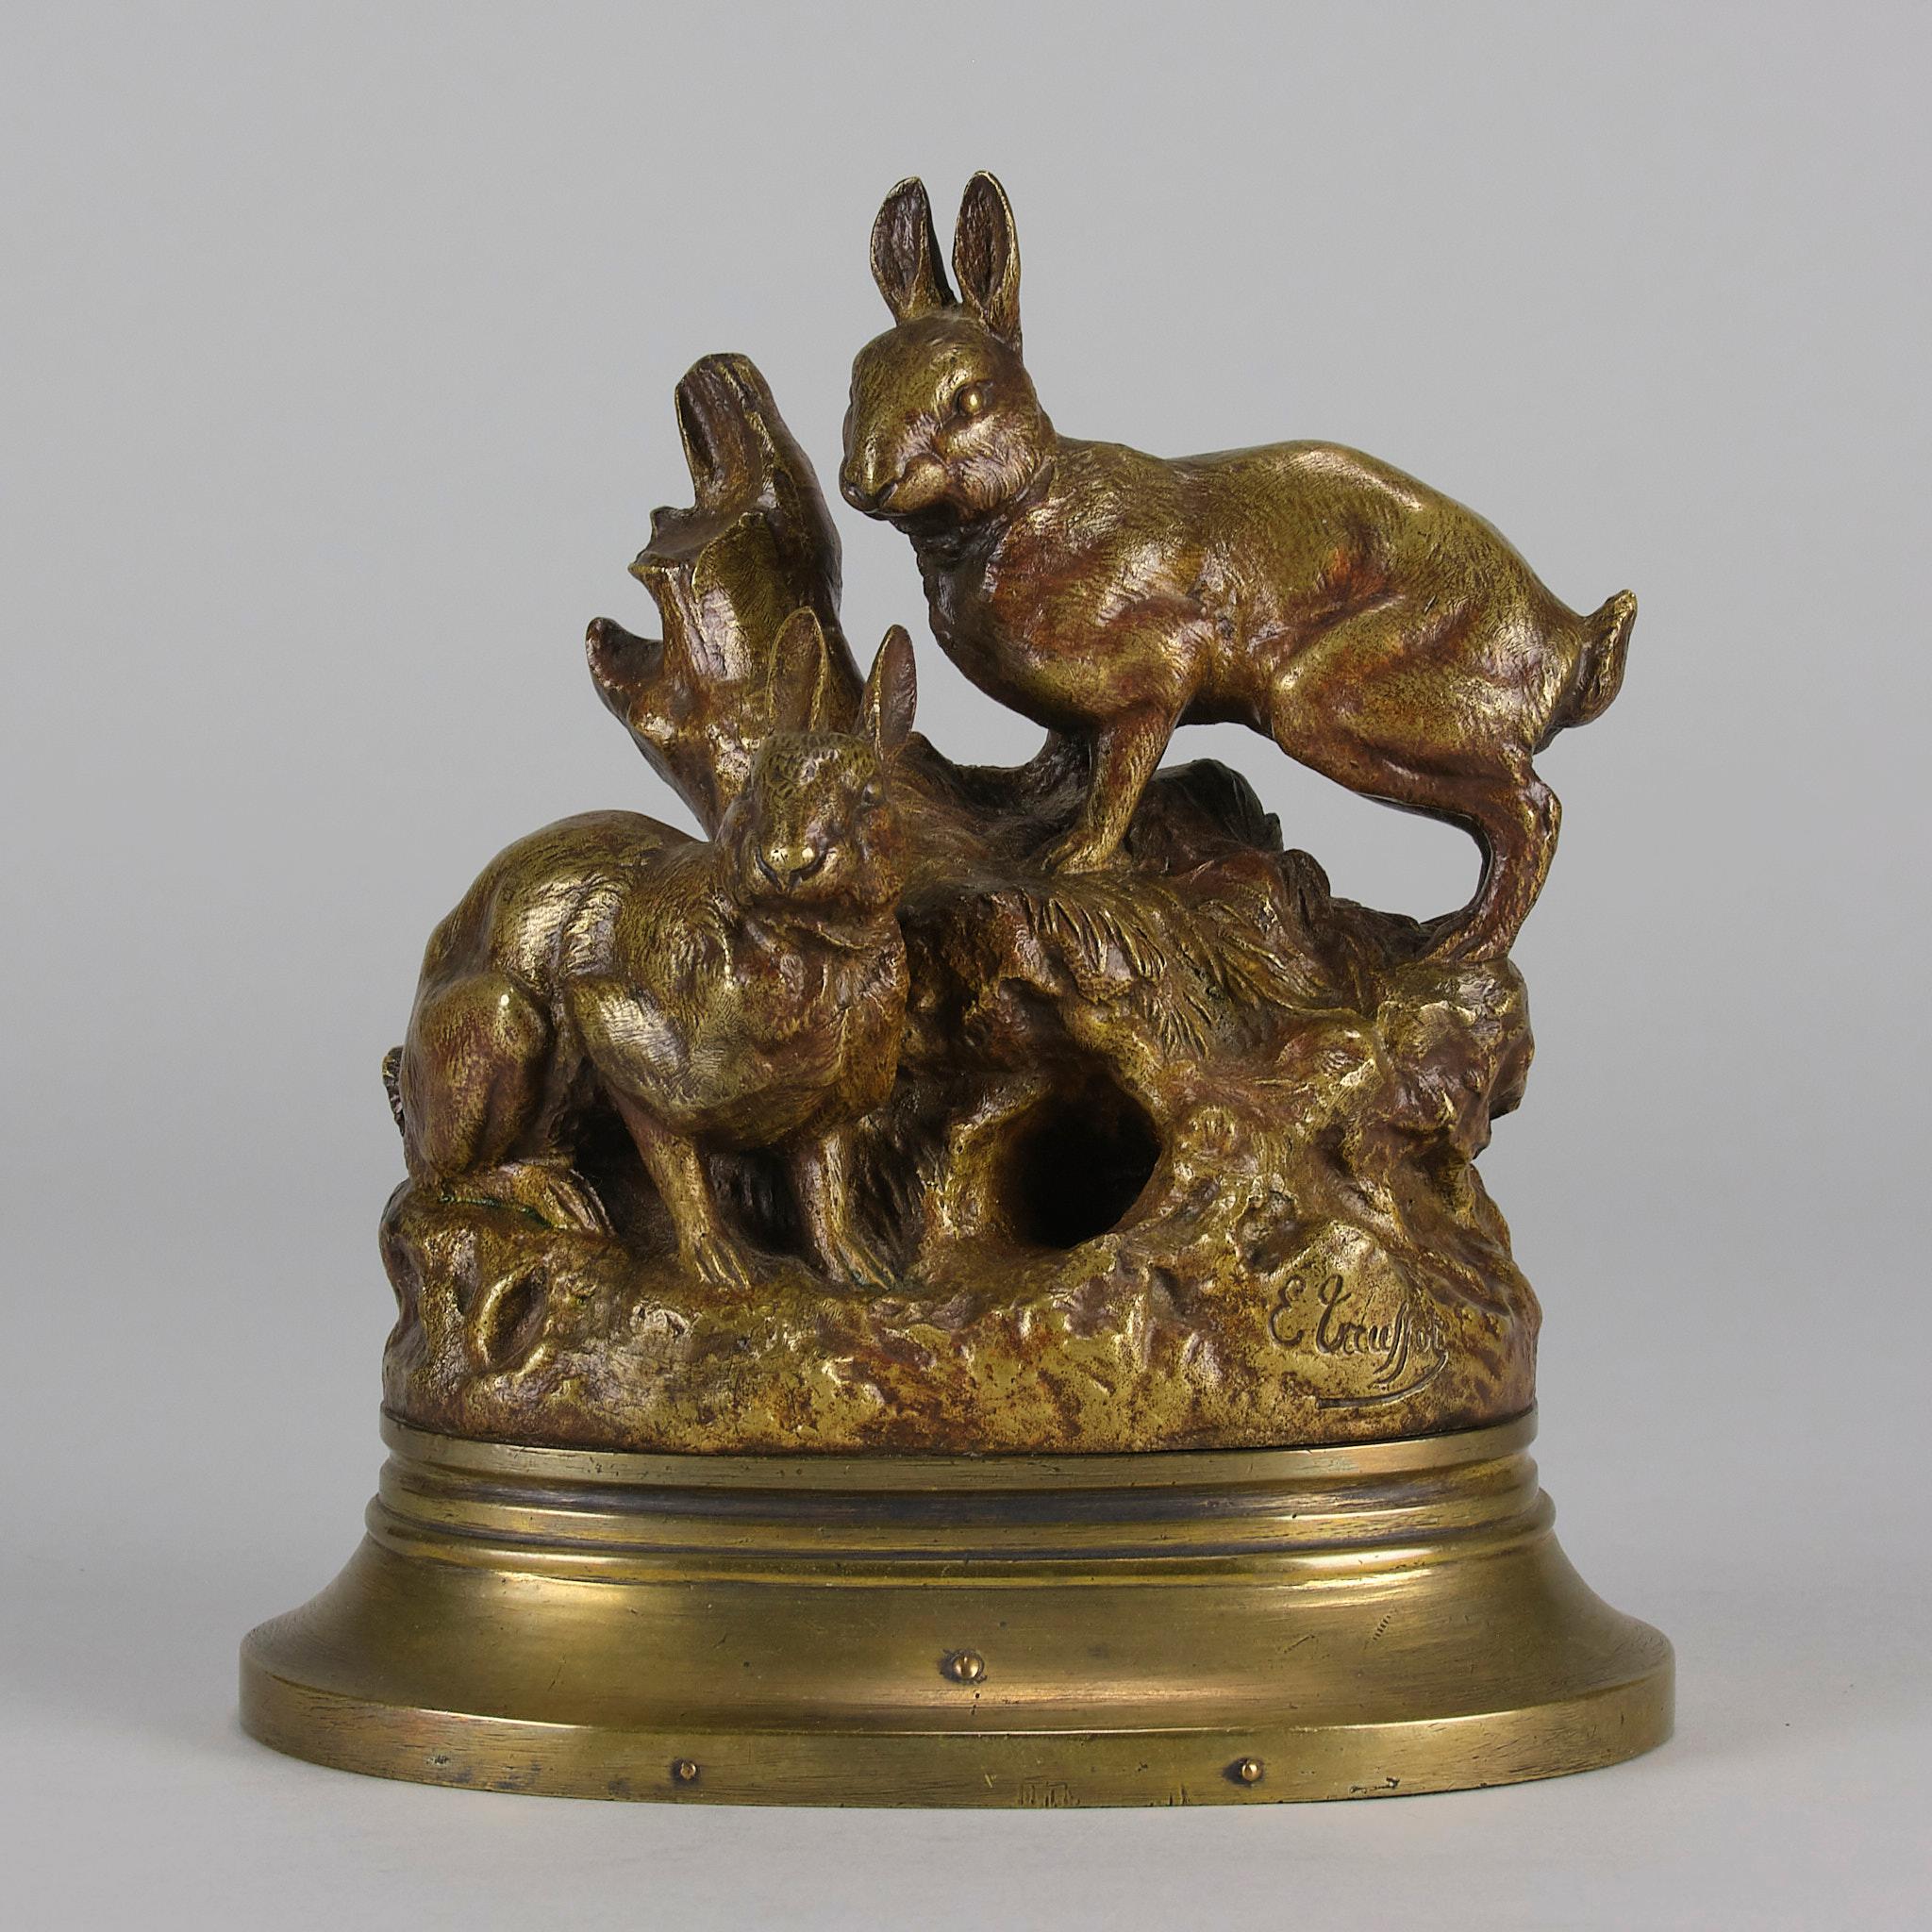 Charming mid 19th Century French gilt bronze study of two rabbits standing in alert positions outside their burrow. The bronze exhibiting excellent hand chased surface detail and fine colour, signed ﻿E.Truffot

ADDITIONAL INFORMATION
Height:        